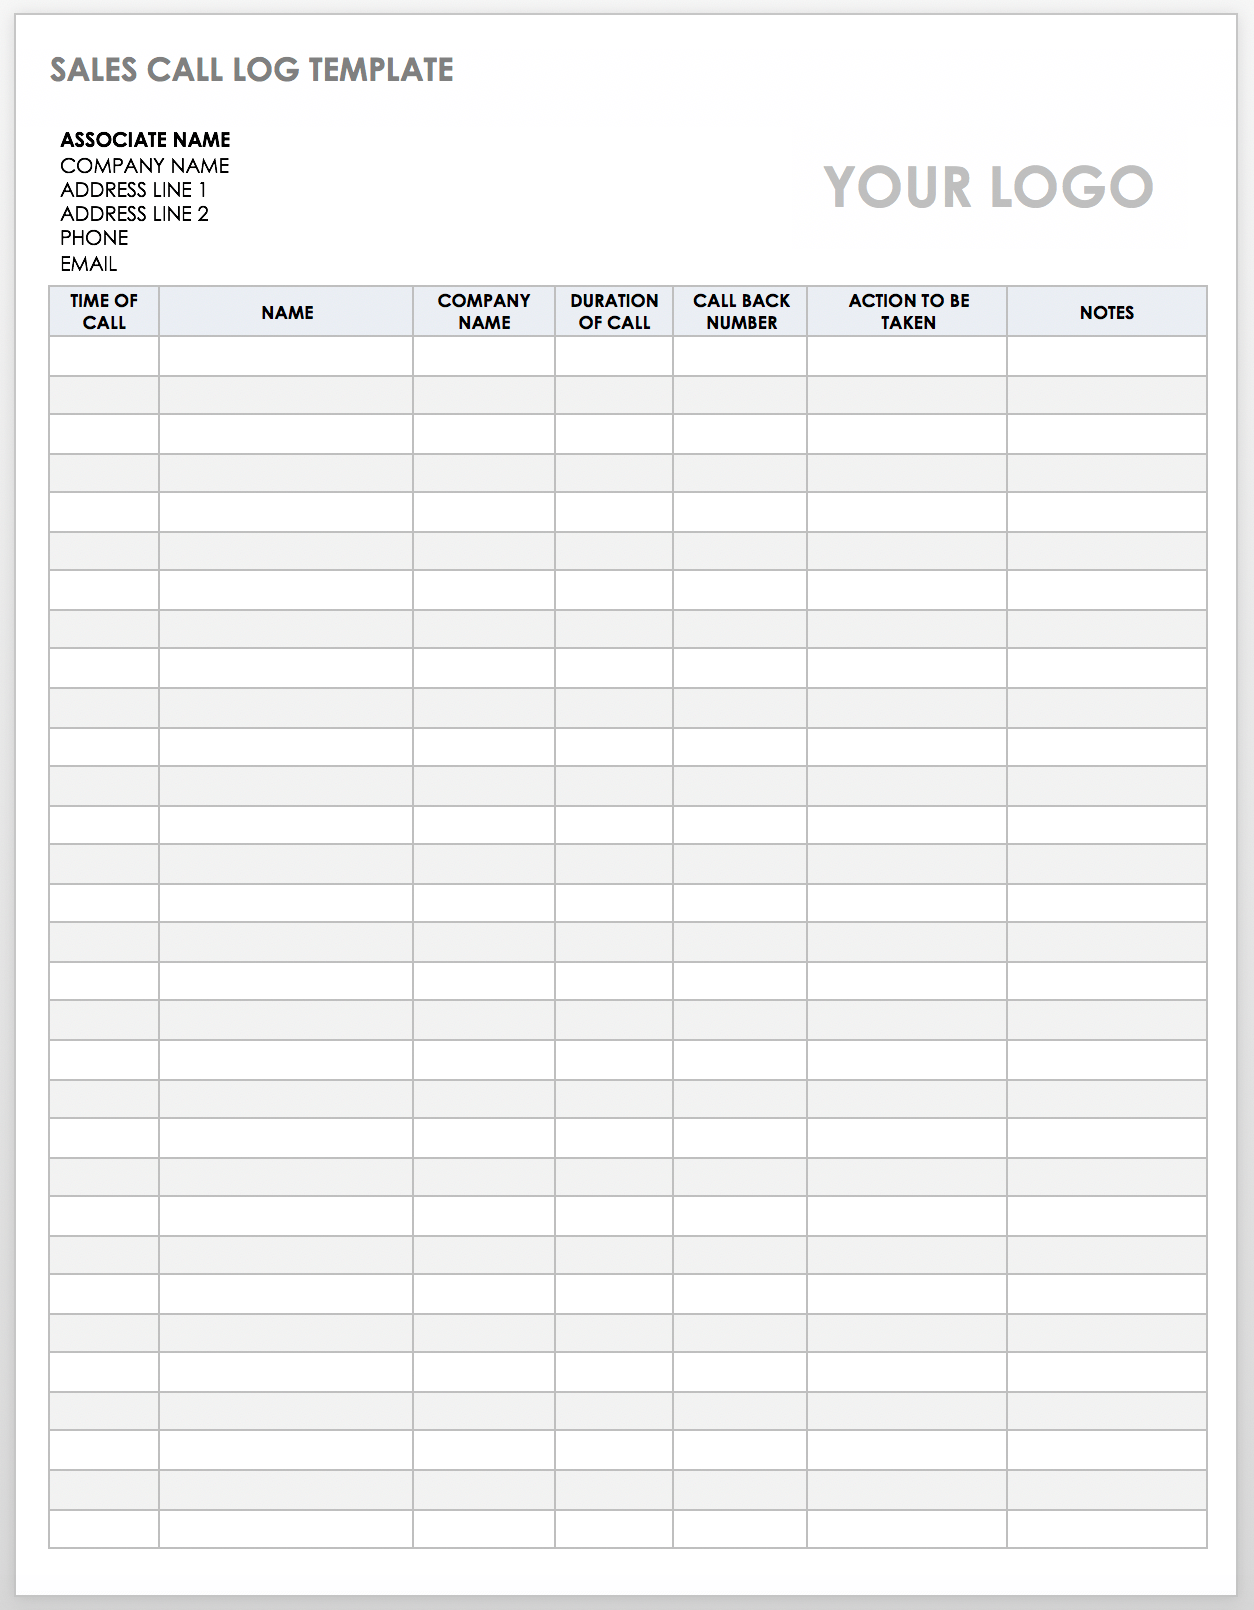 Free Client Call Log Templates  Smartsheet Within Sales Rep Visit Report Template